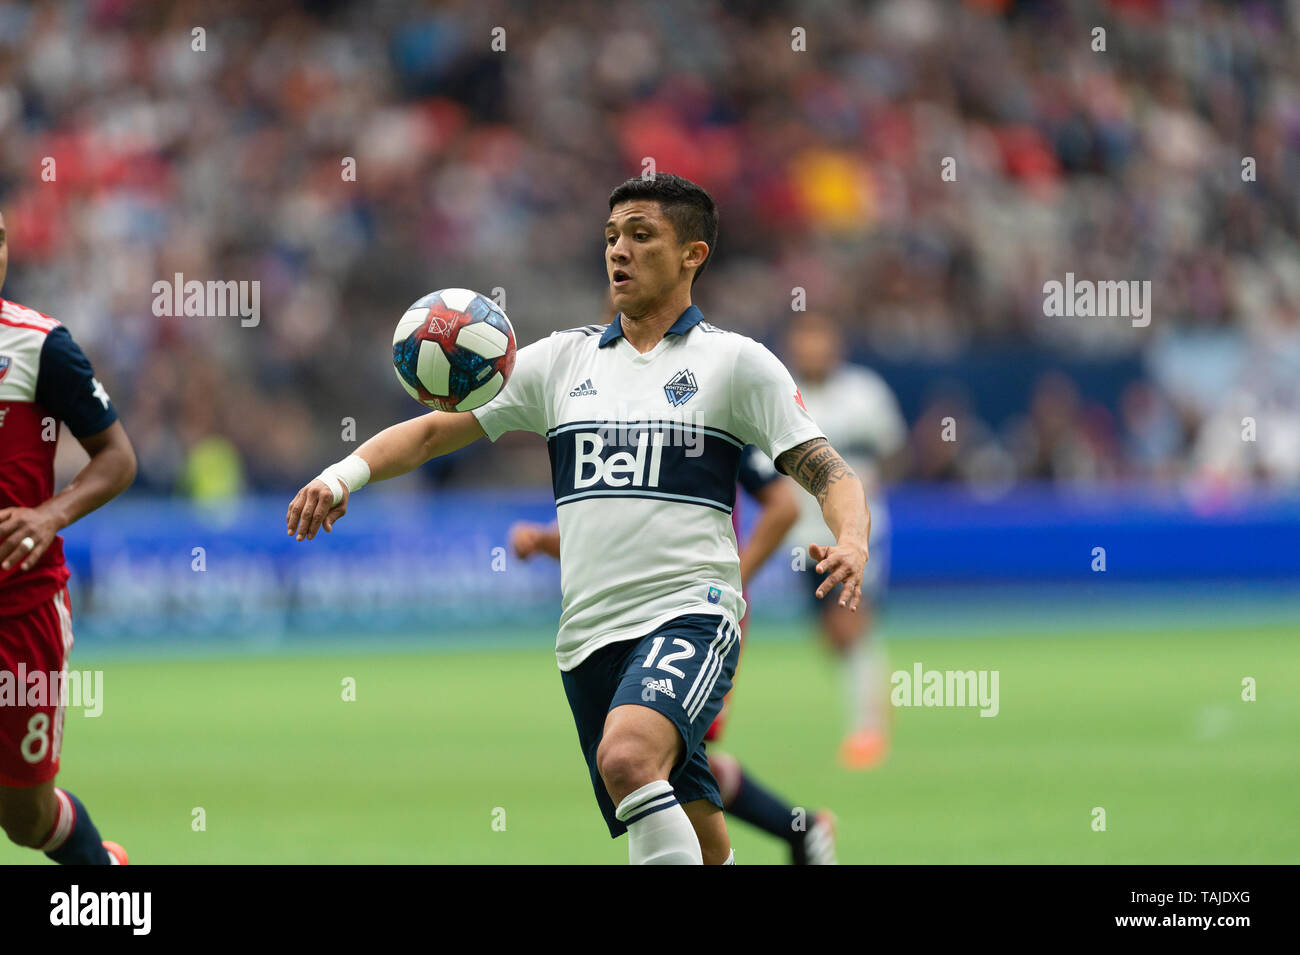 Vancouver, Canada. 25 May 2019. Fredy Montero (12) of Vancouver Whitecaps, attempting control of the ball. Final Score Vancouver 2 Dallas 1. MLS Soccer Vancouver Whitecaps vs FC Dallas at BC Place Stadium Vancouver Canada.  © Gerry Rousseau/Alamy Live News Stock Photo